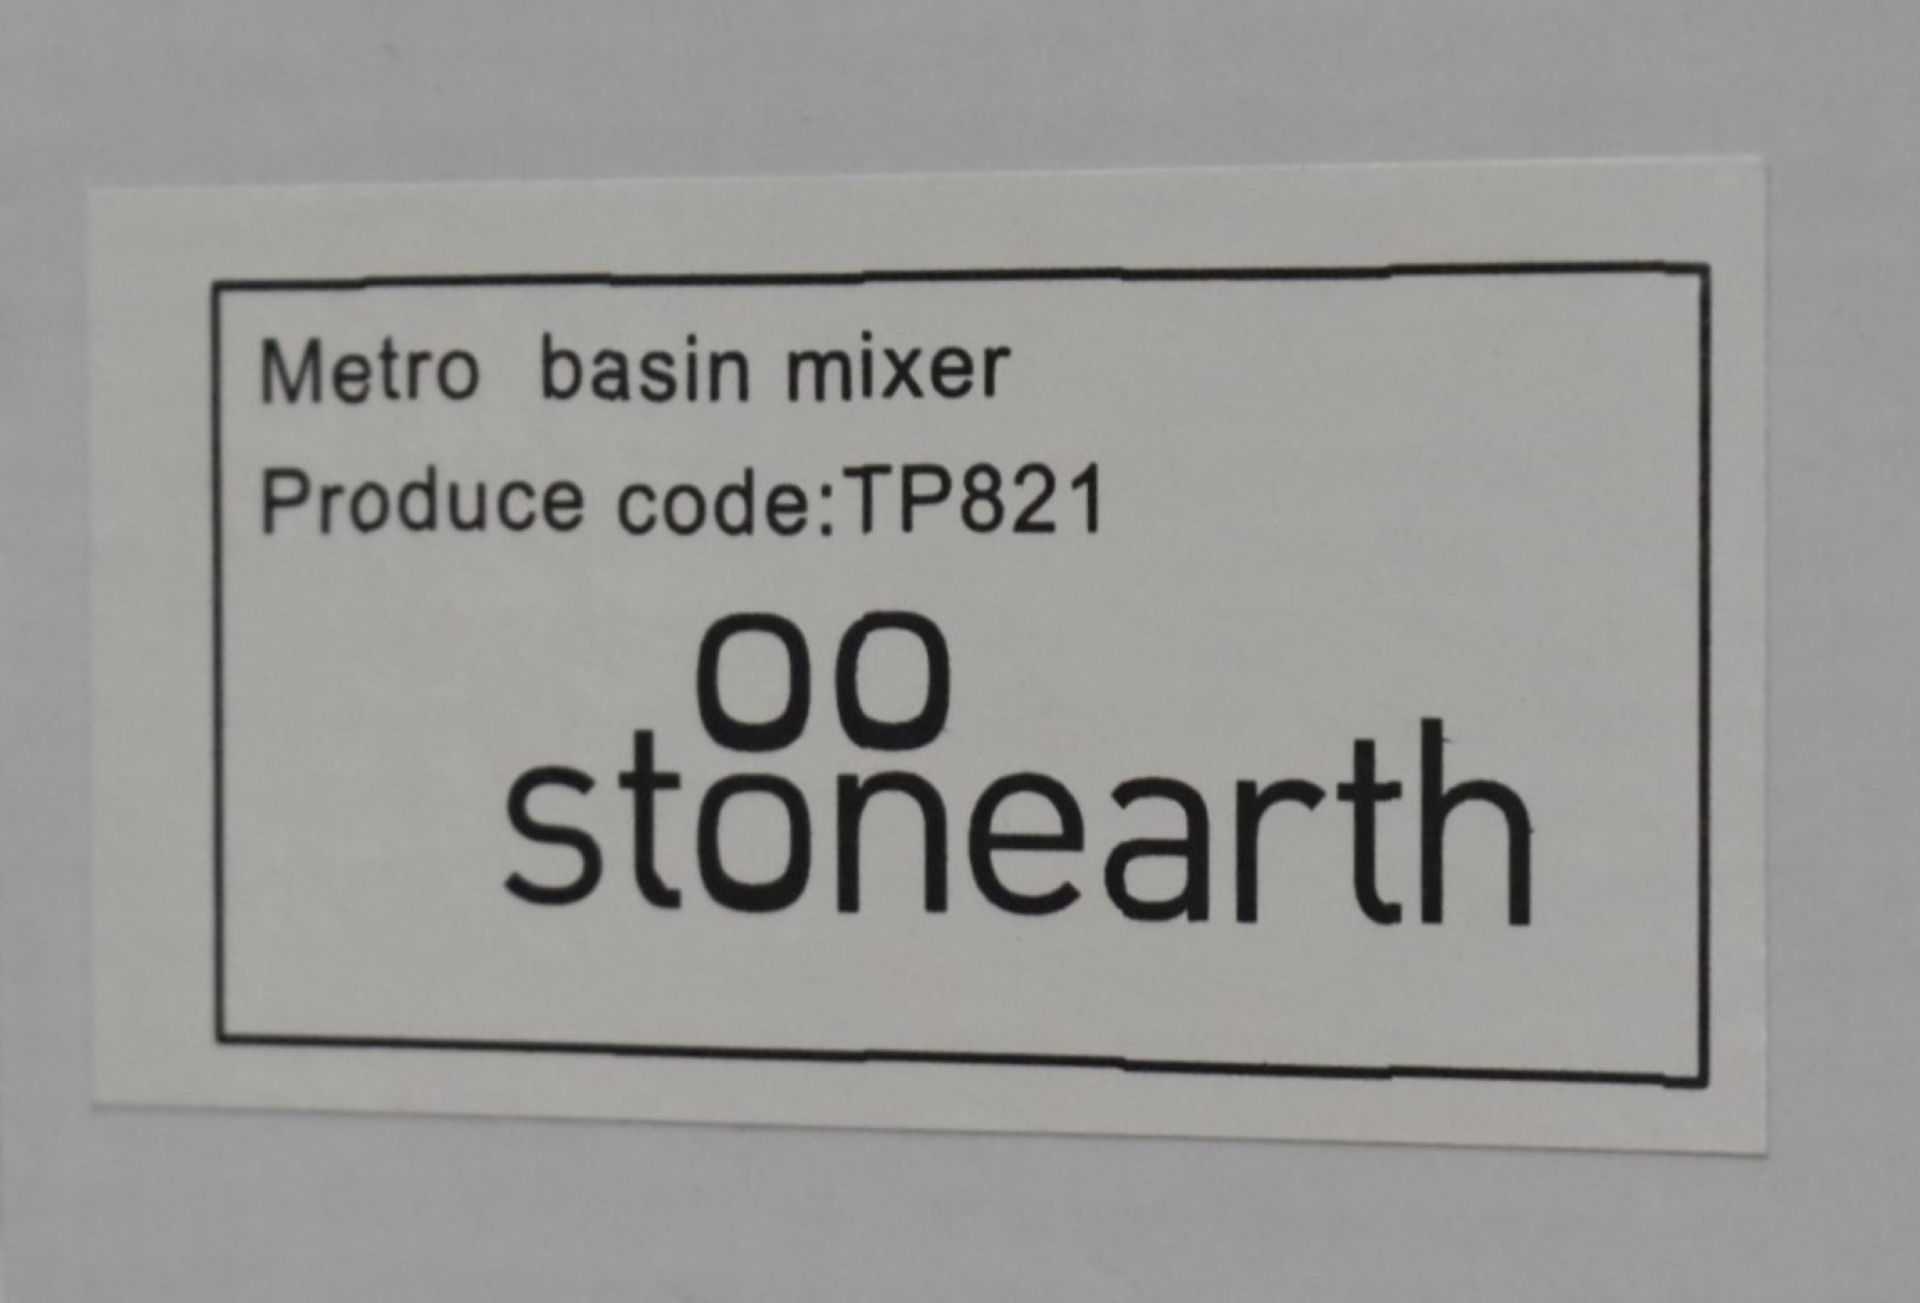 1 x Stonearth 'Metro' Stainless Steel Basin Mixer Tap - Brand New & Boxed - RRP £245 - Ref: TP821 P6 - Image 7 of 14